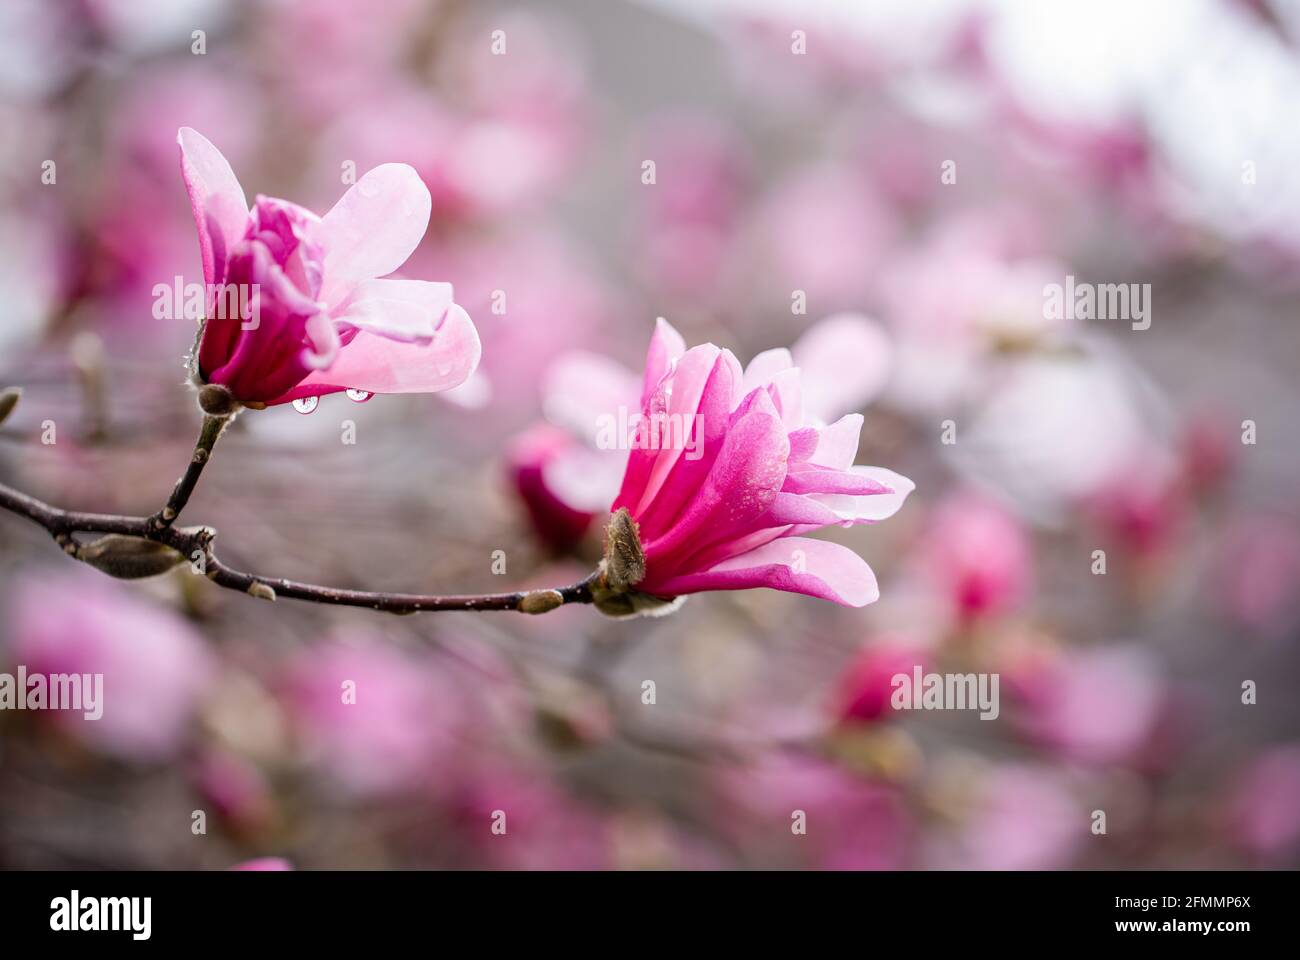 Pink magnolia flowers blooming on branches of a tree on a spring day. Stock Photo